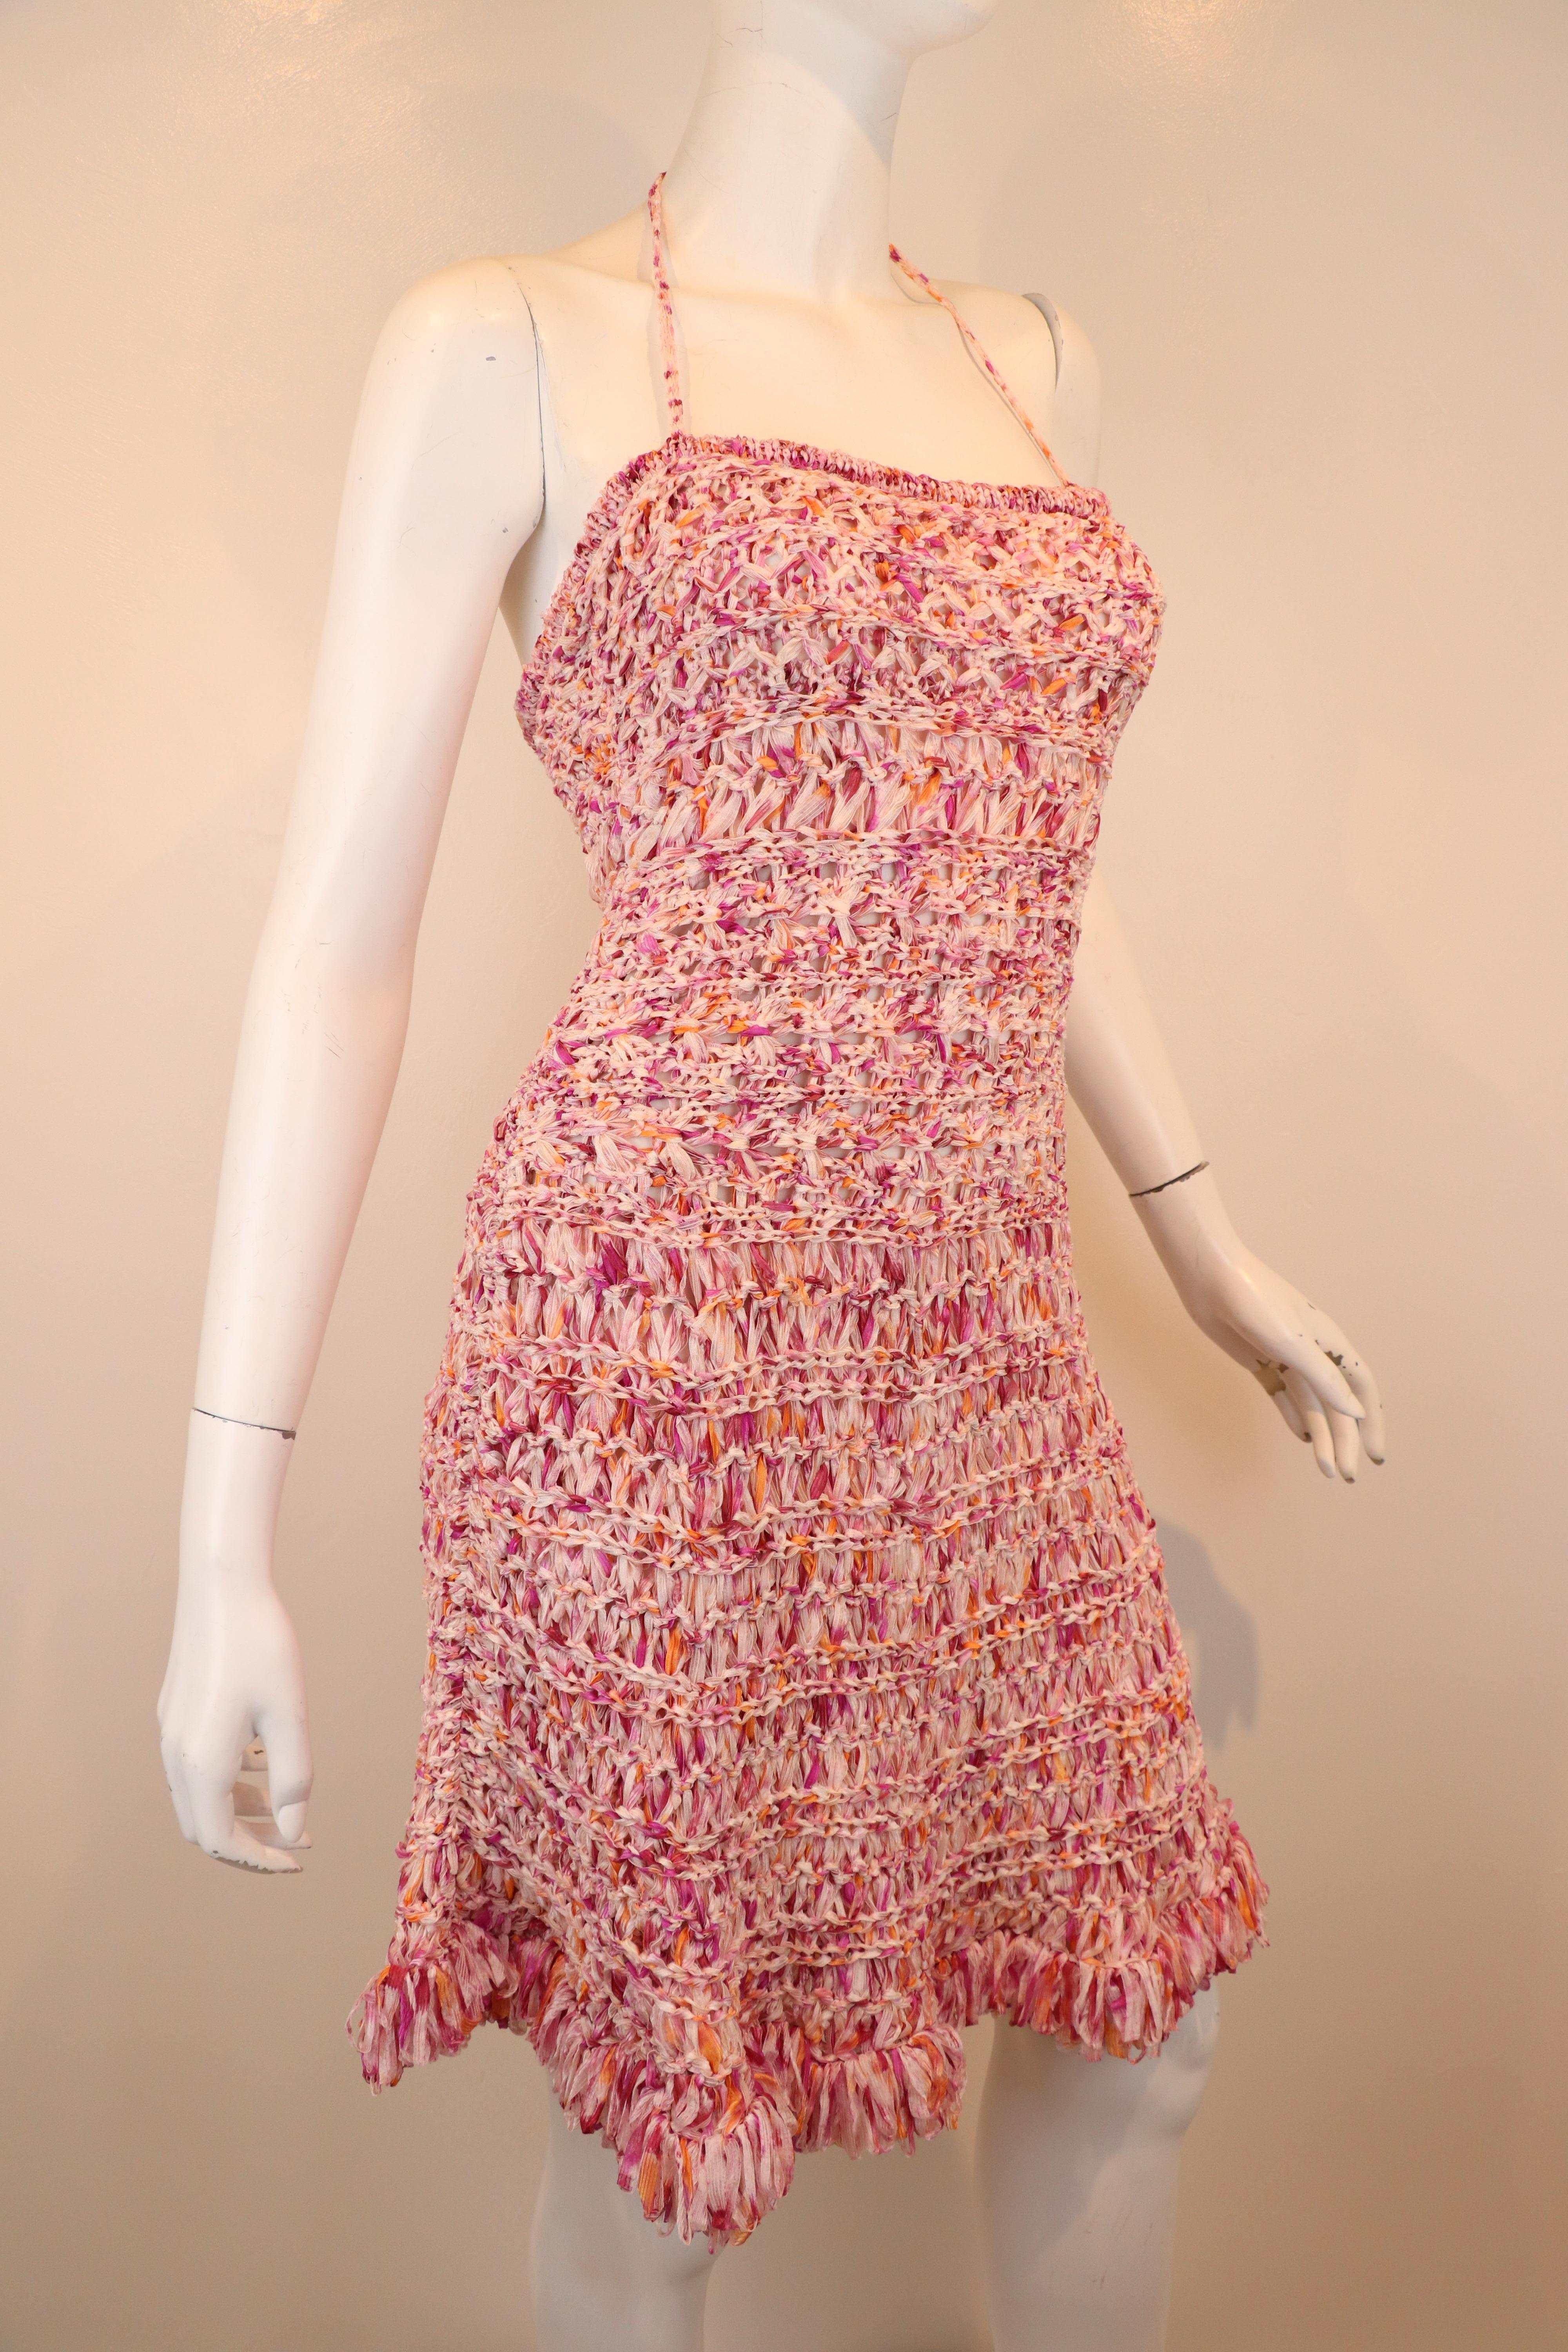 Beautiful Christian Dior fit and flare dress with pink and white woven ribbon with a fringe hem and two matching straps that tie as a halter on this amazing dress. France size 40. Made in France. Dress is in pristine condition.

Bust: 34